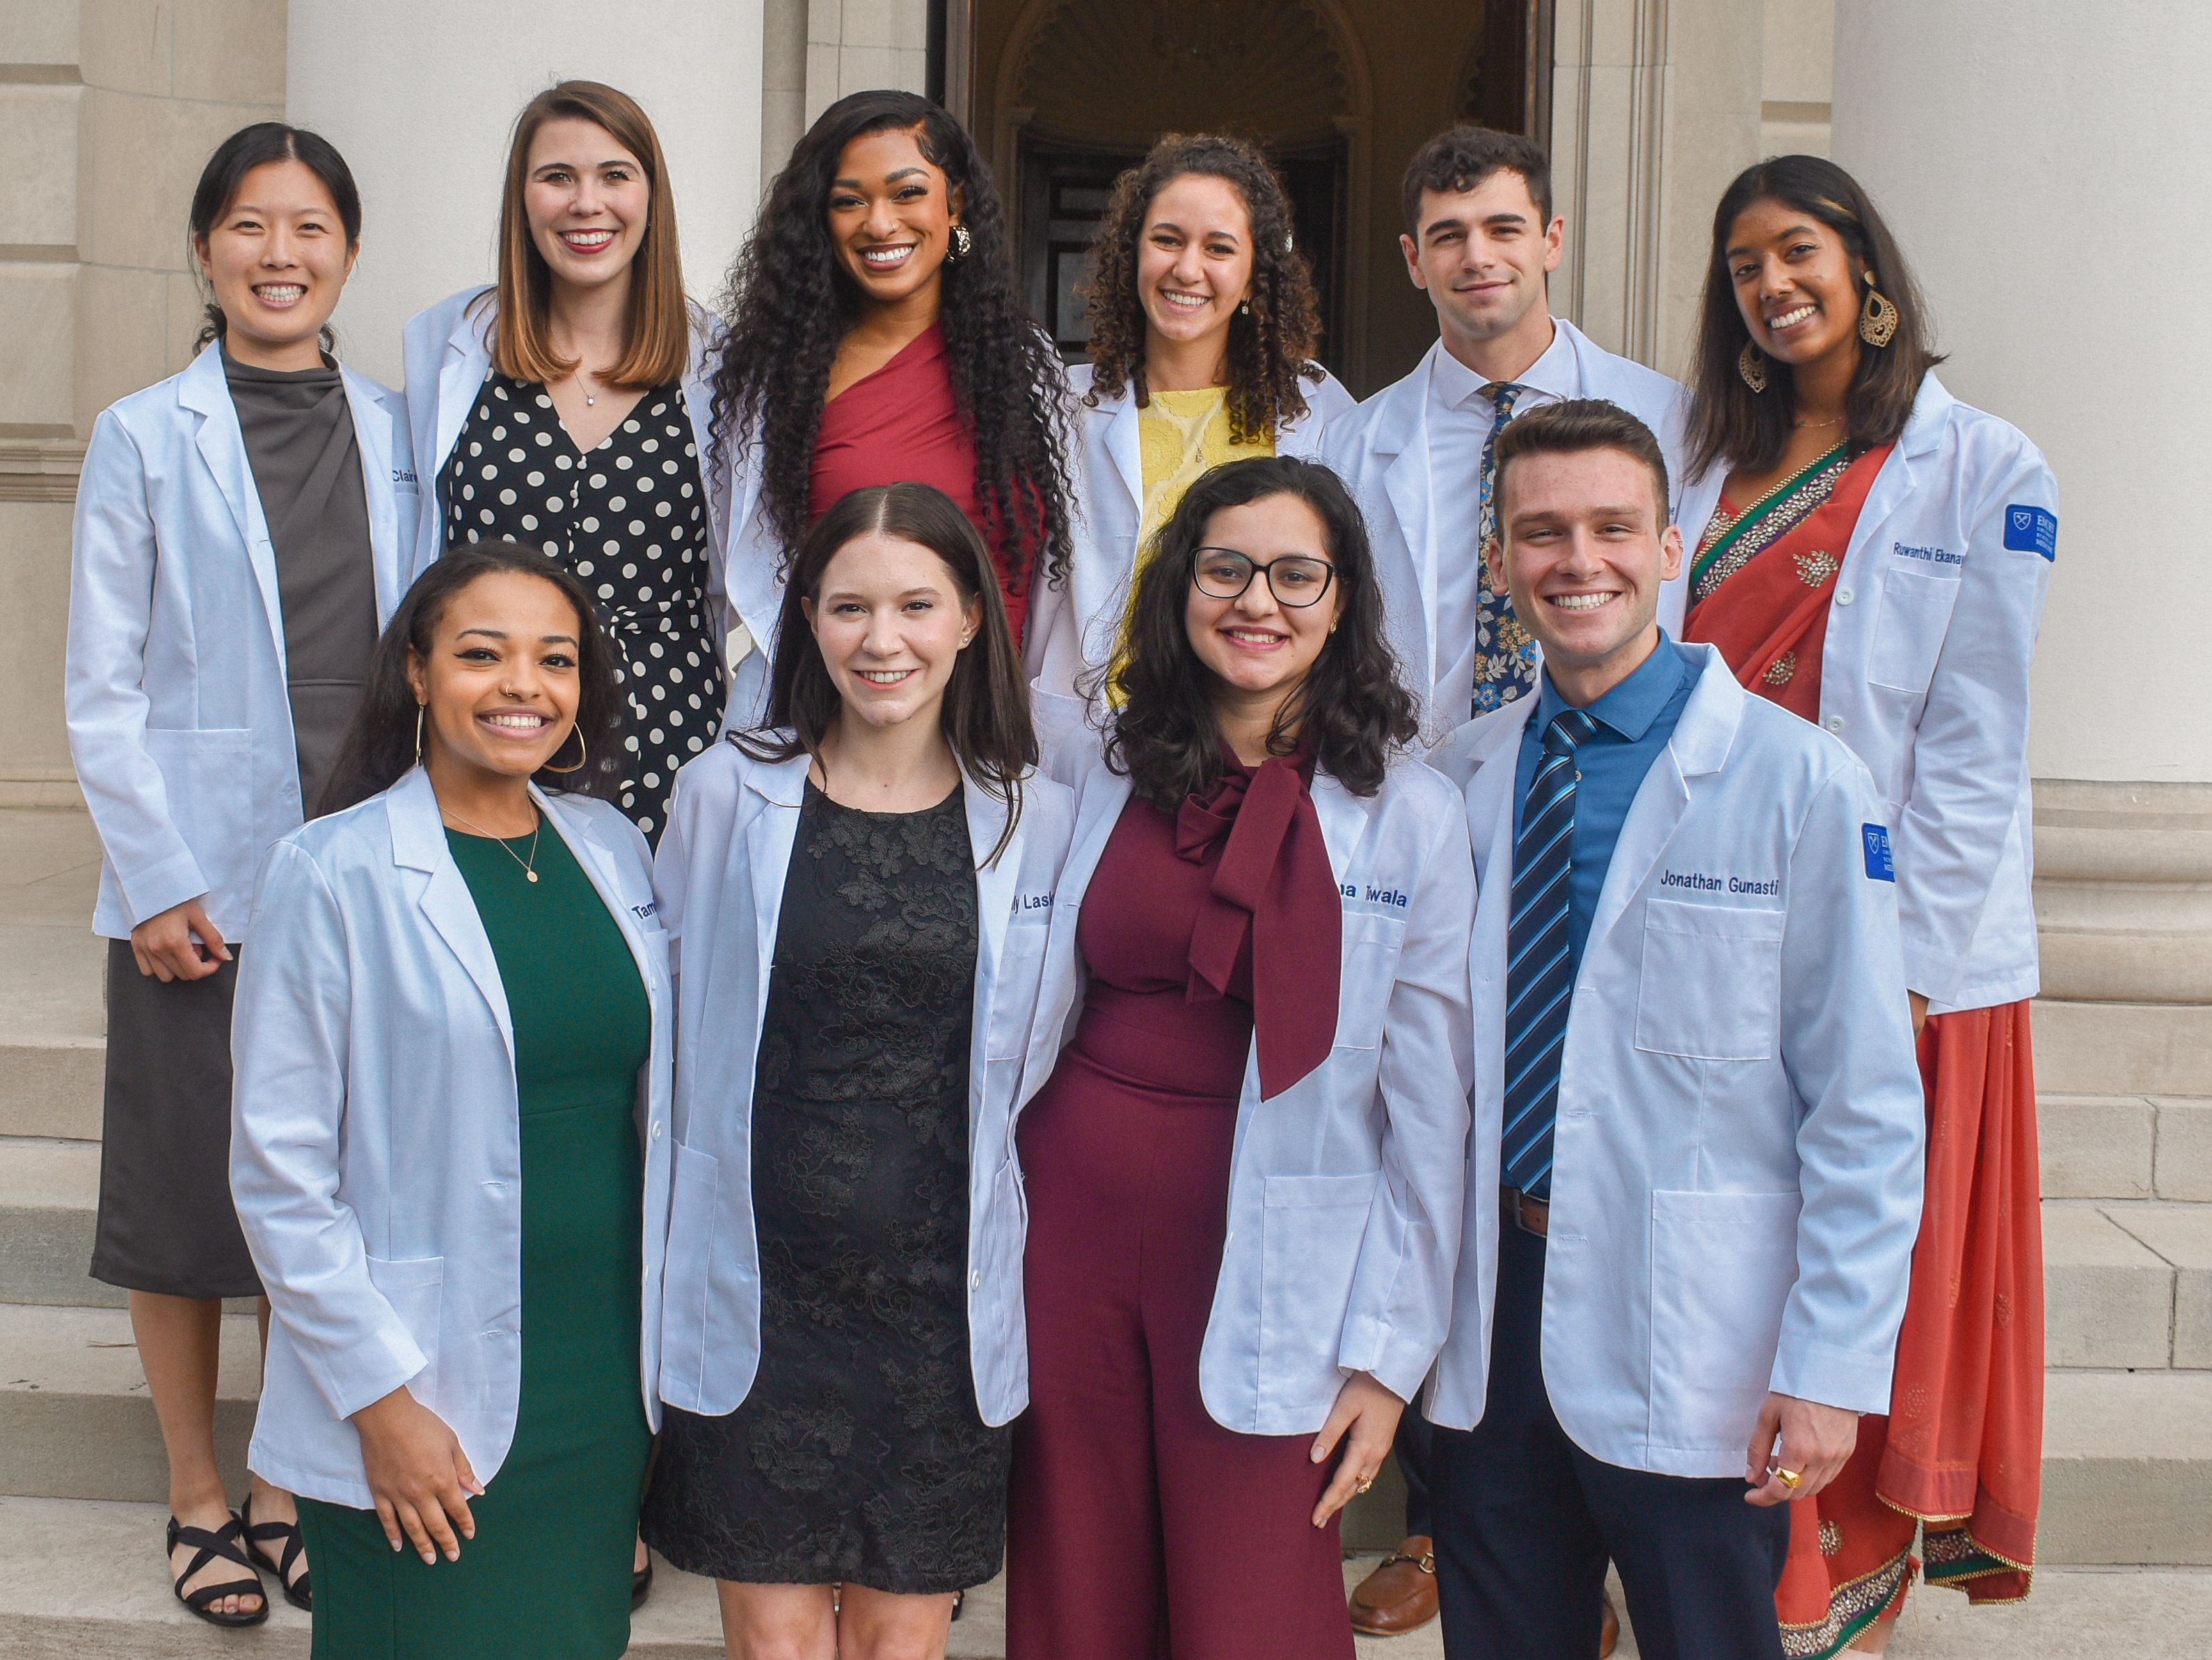 Group of MD PhD students in white coats